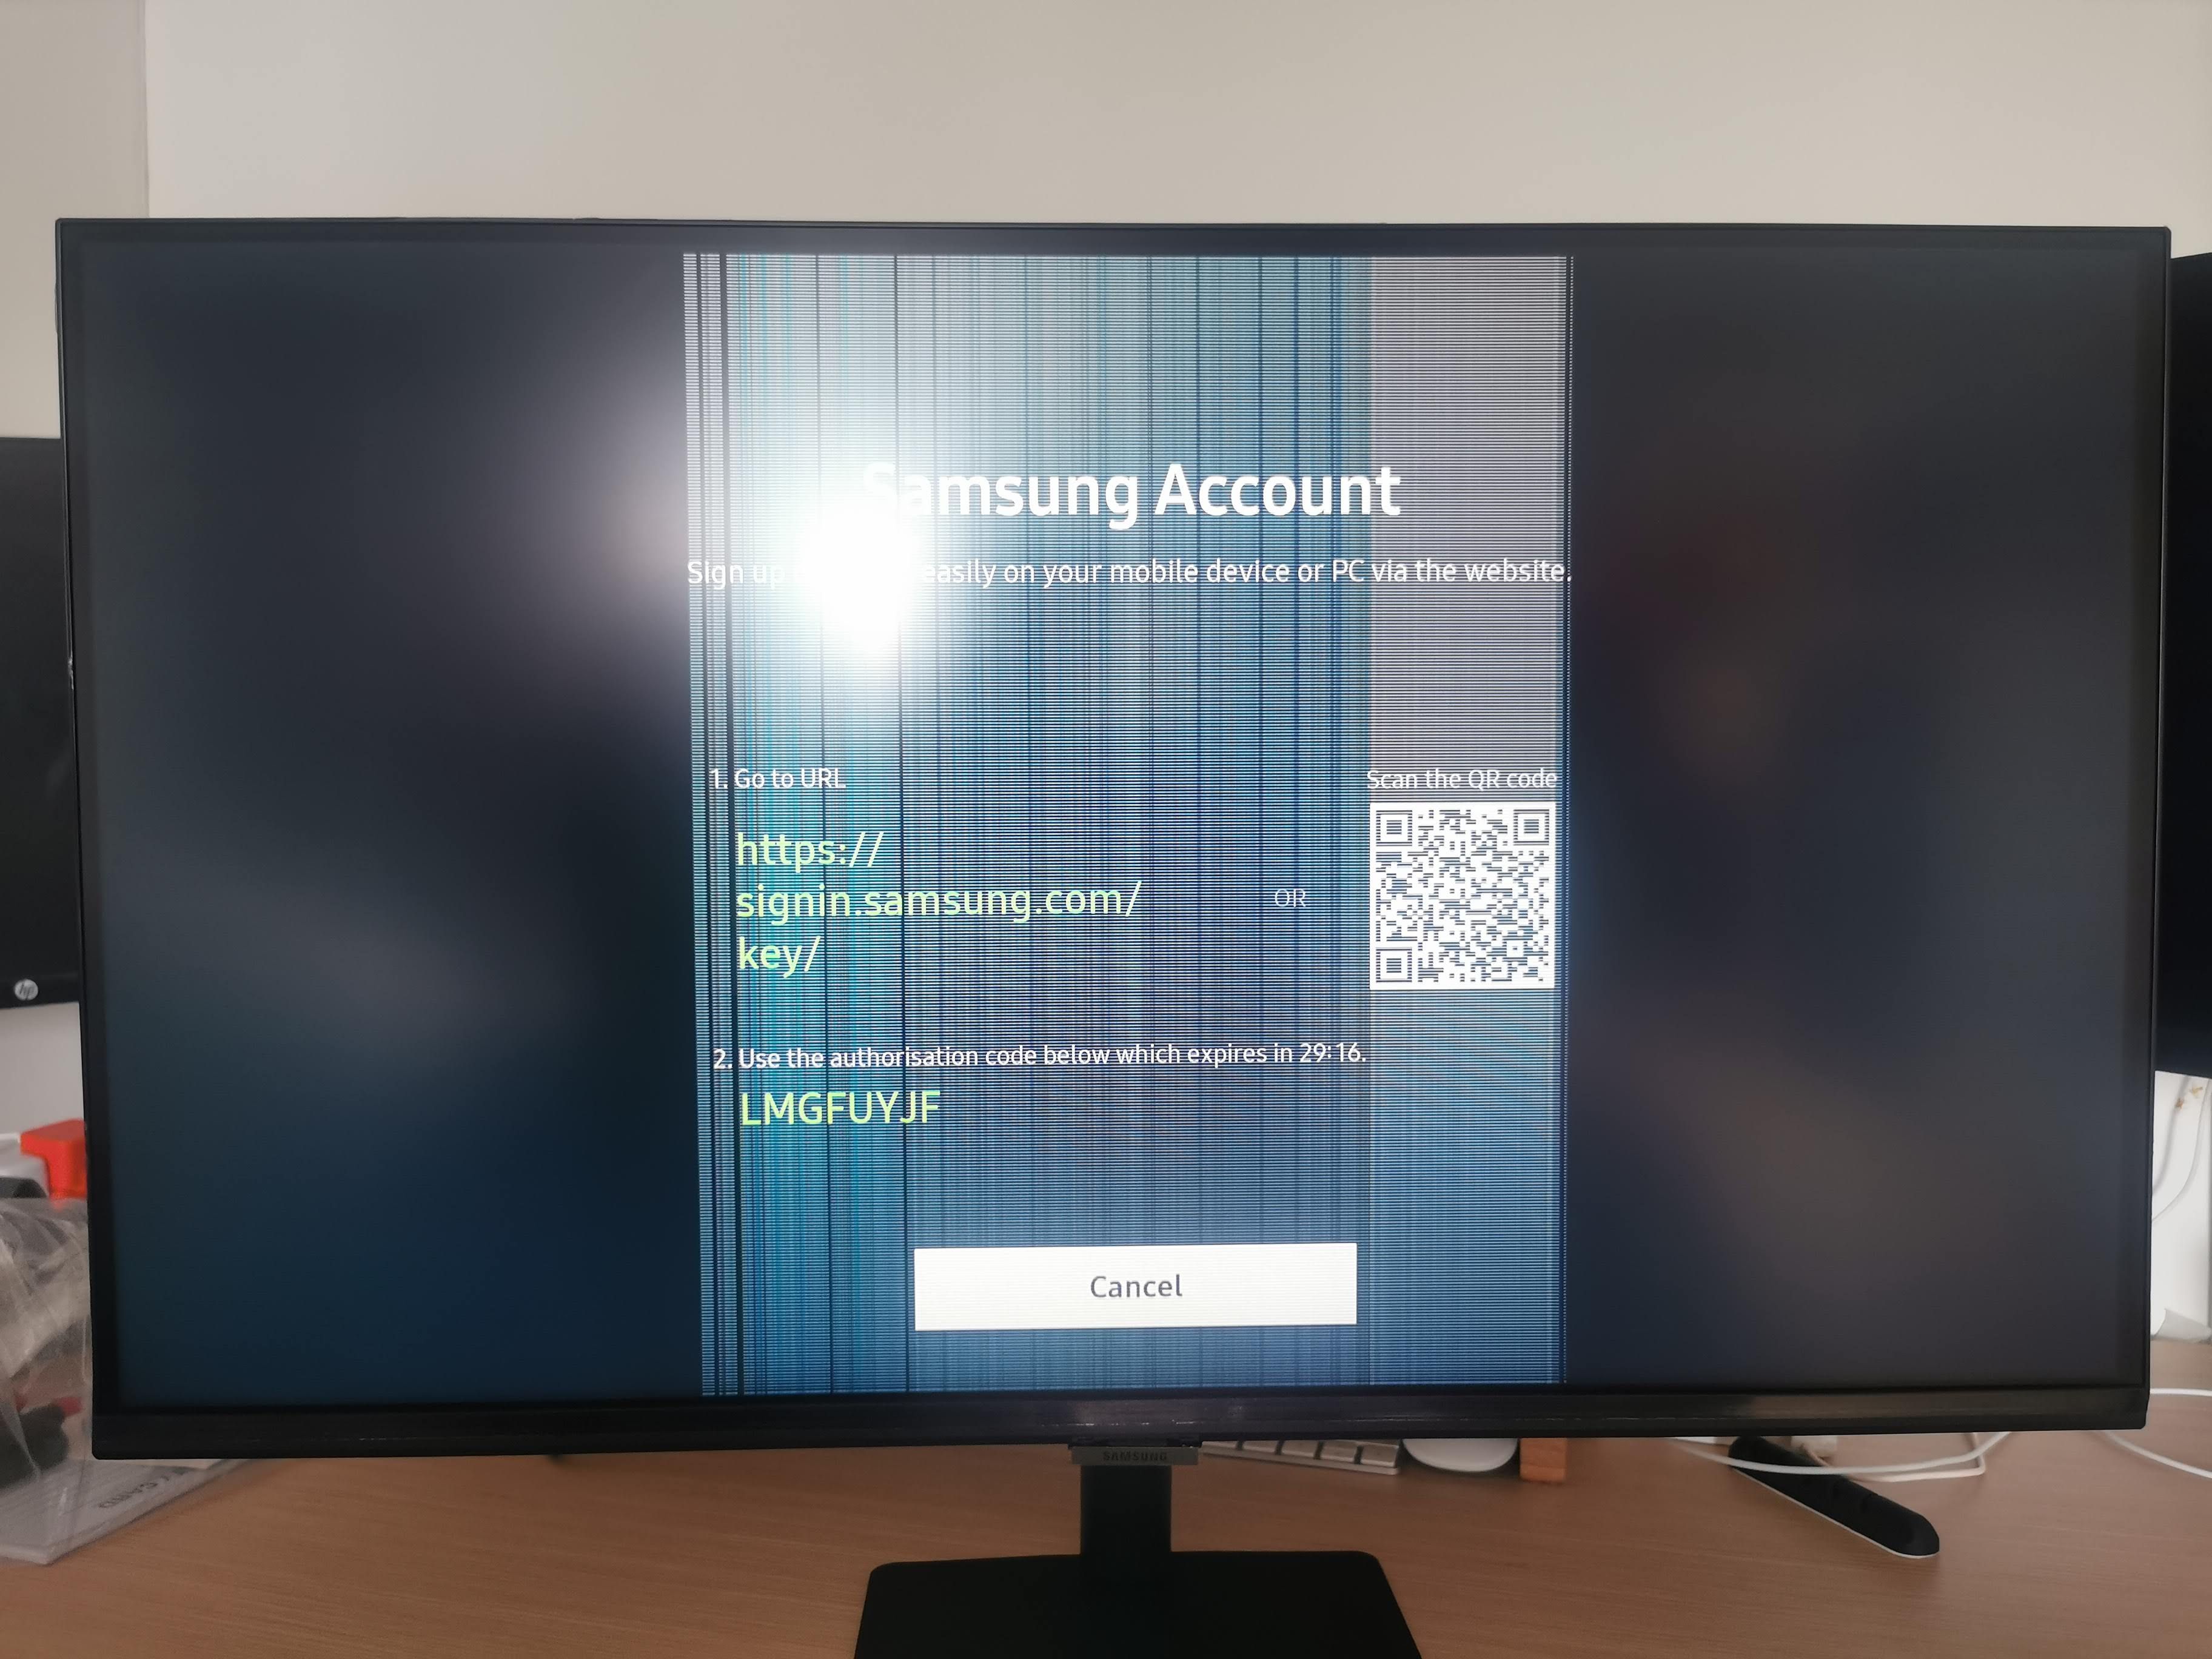 Samsung's Smart Monitor tries too hard to be clever • The Register